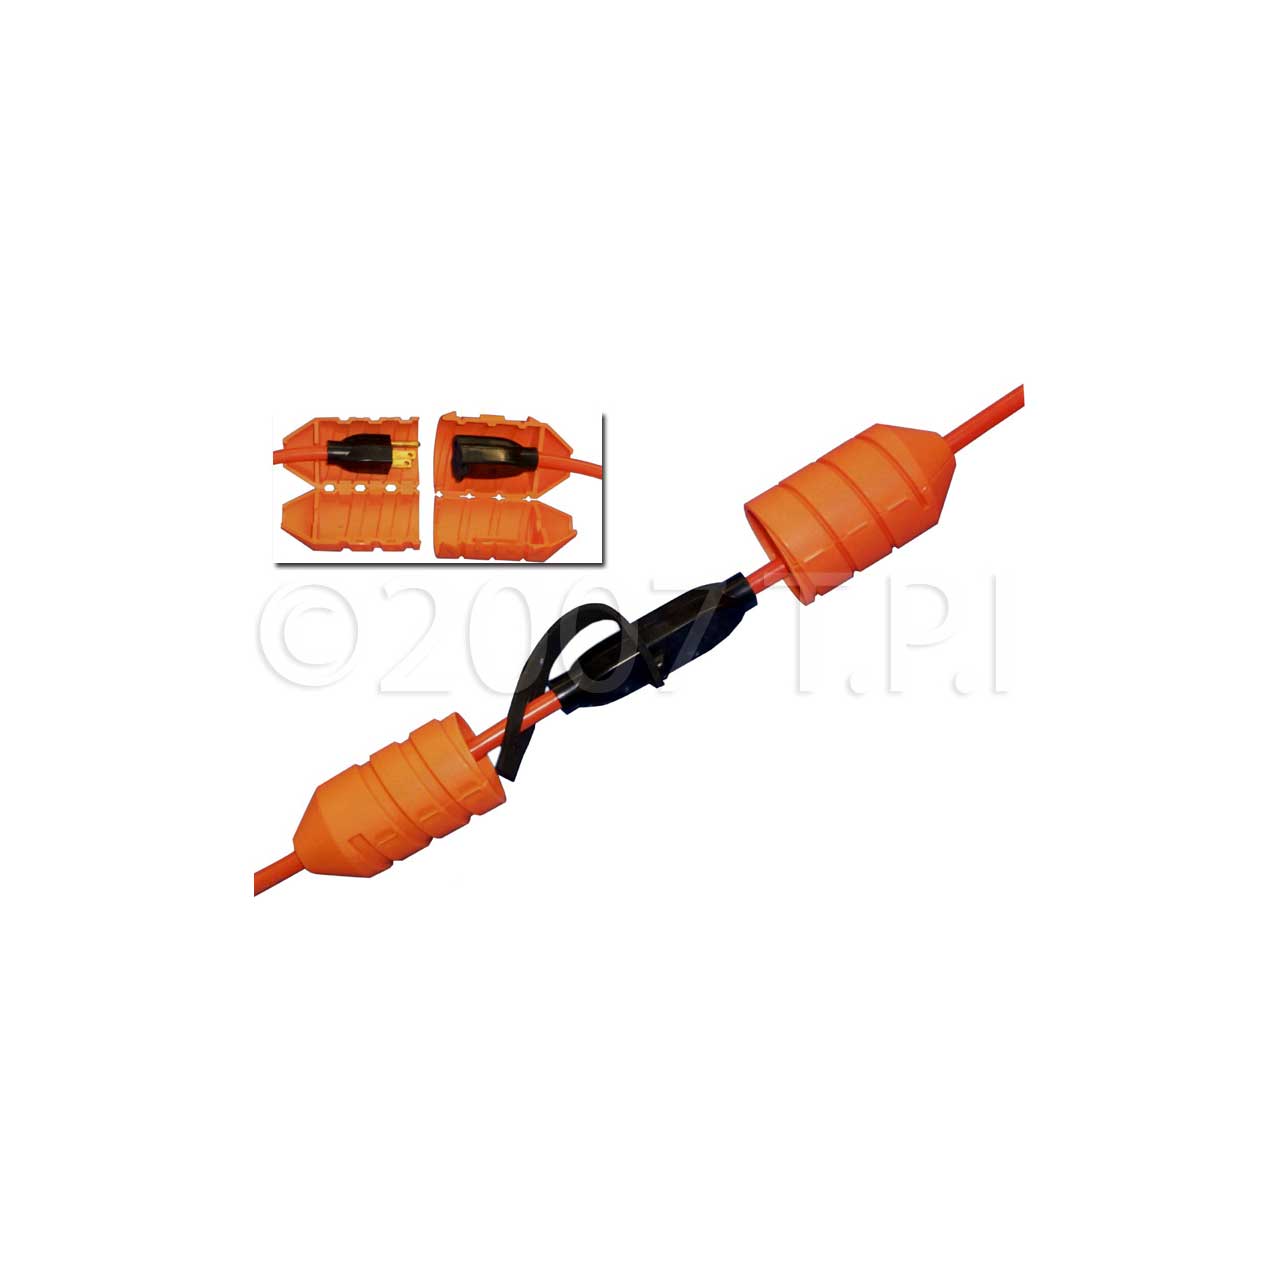 Details about    2 NEW Farm Innovators Cord Connect Water Tight Connection USA CC1 Orange 